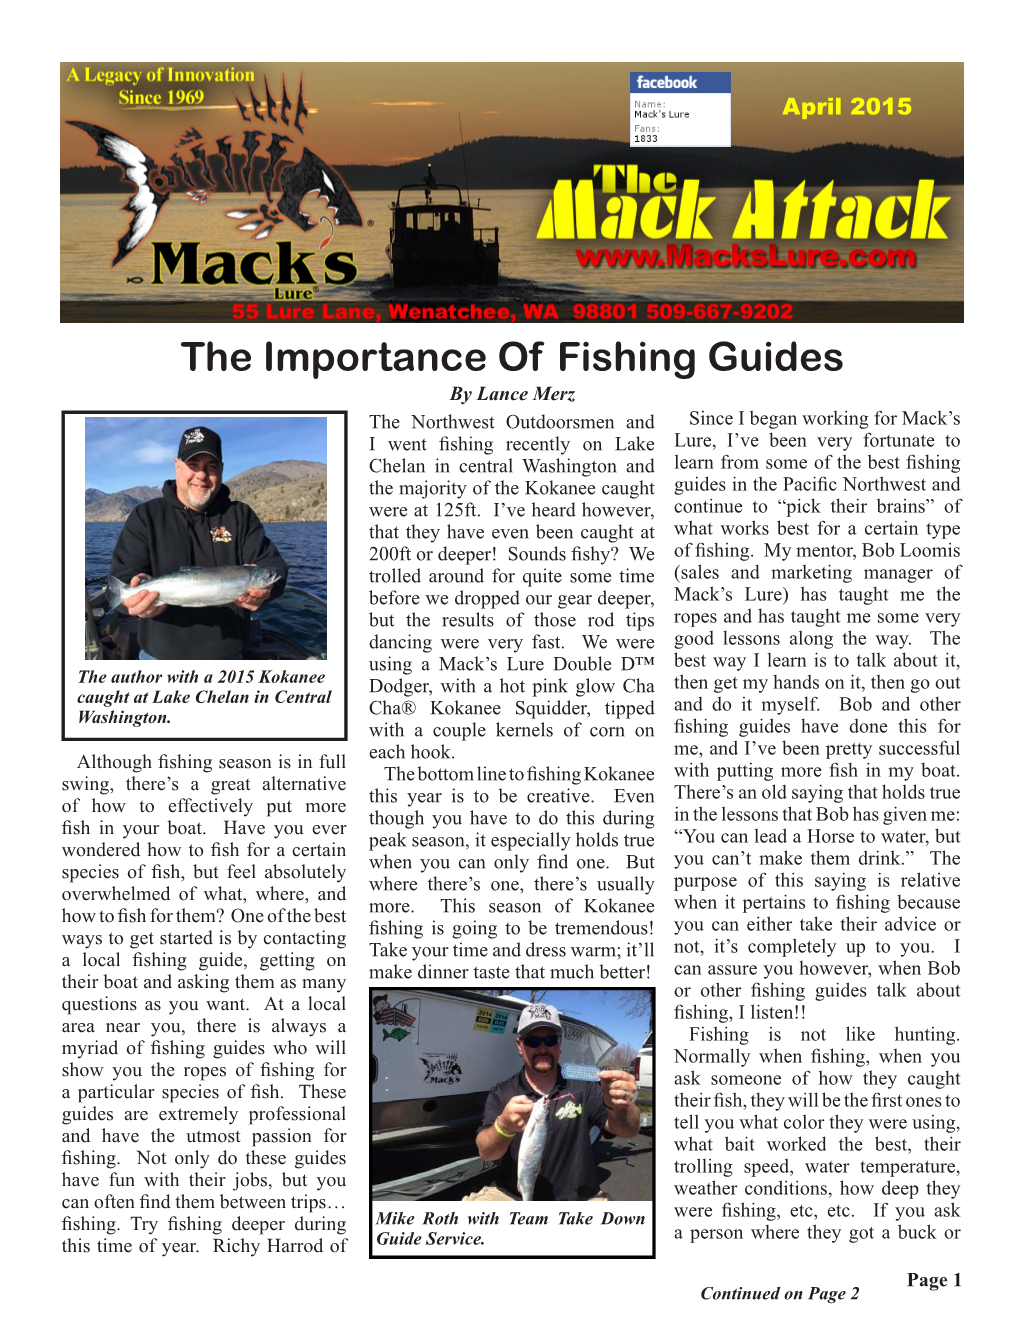 The Importance of Fishing Guides